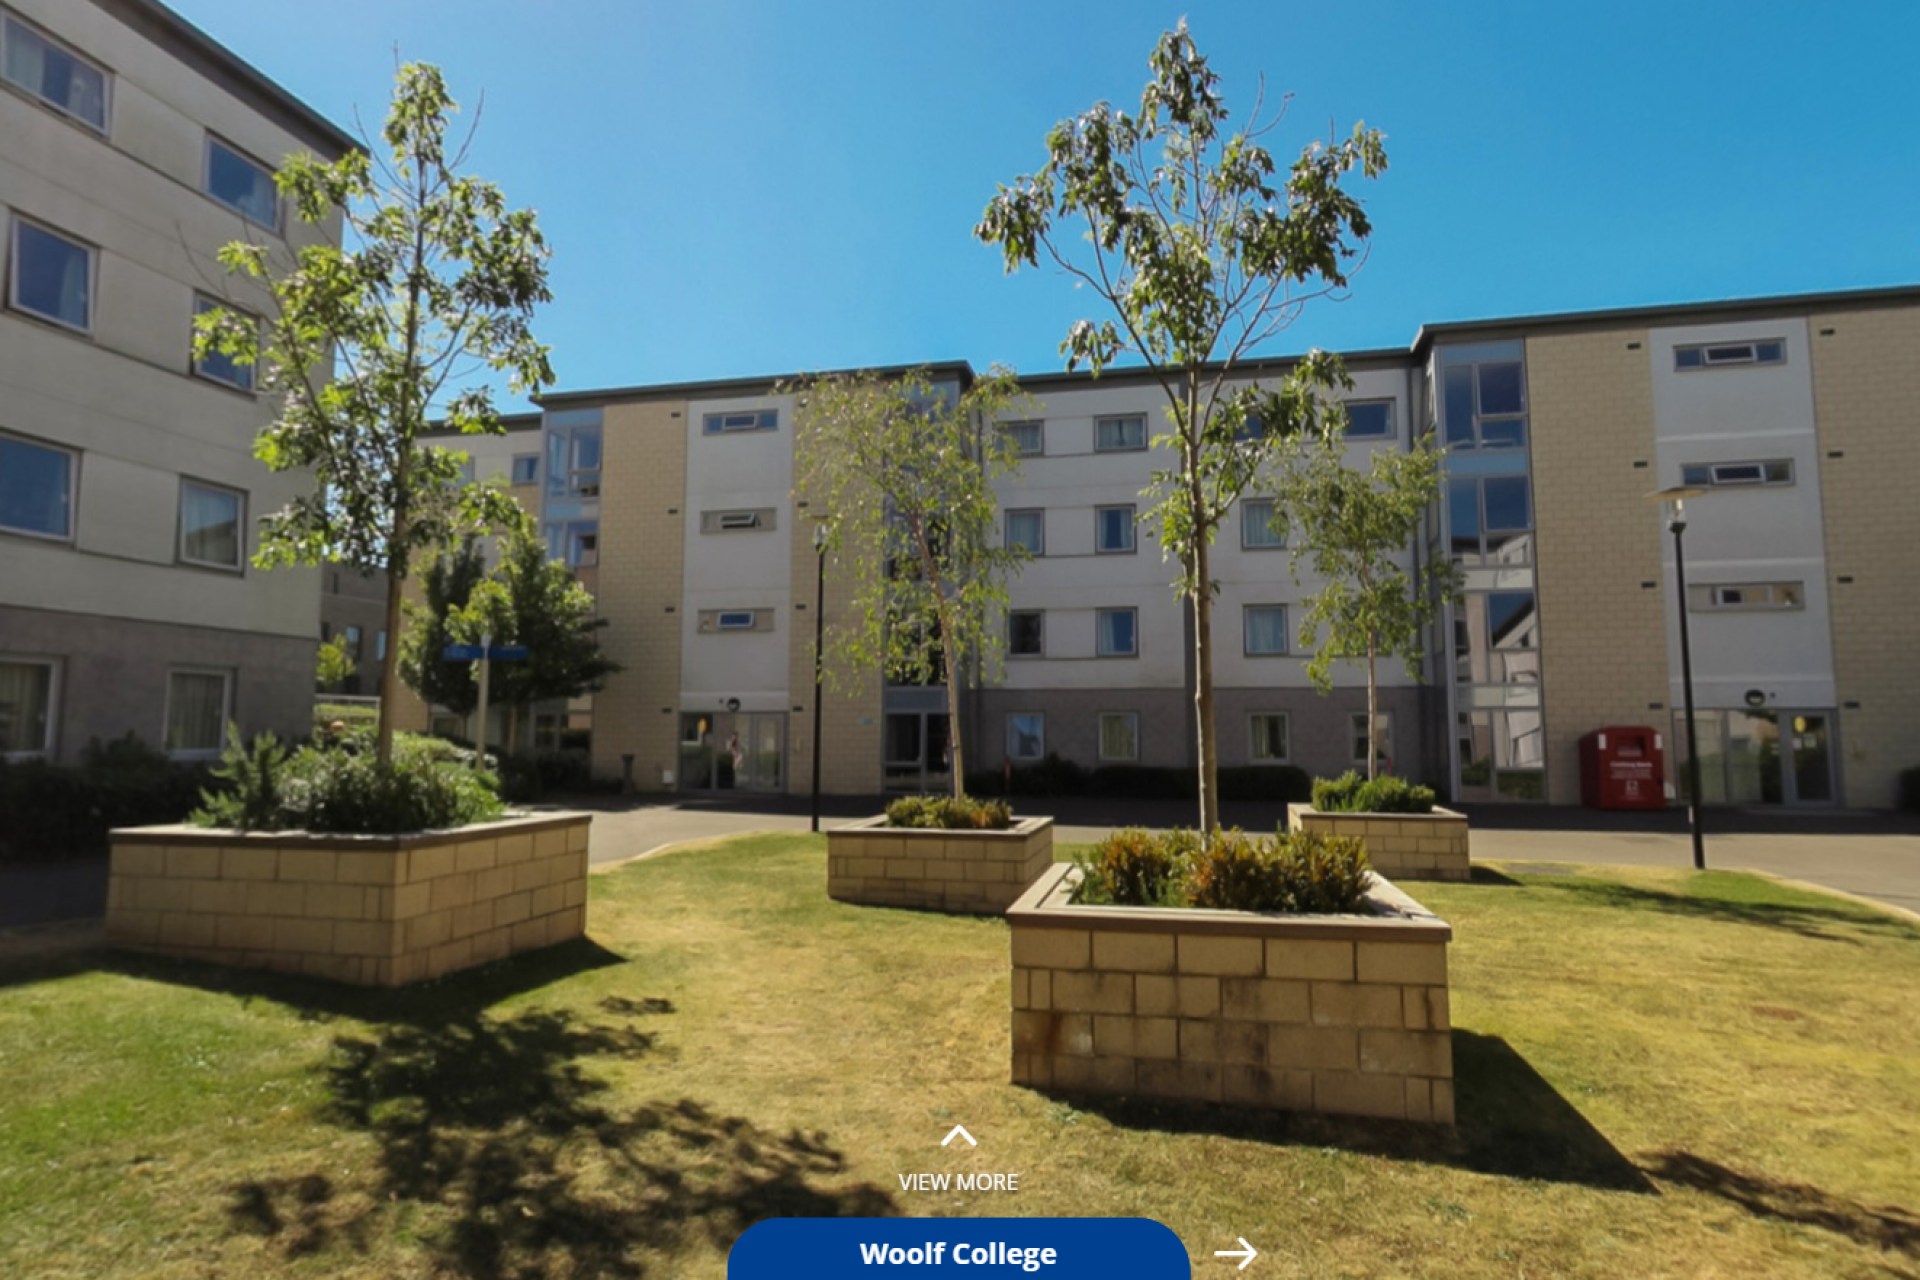 Woolf College virtual tour